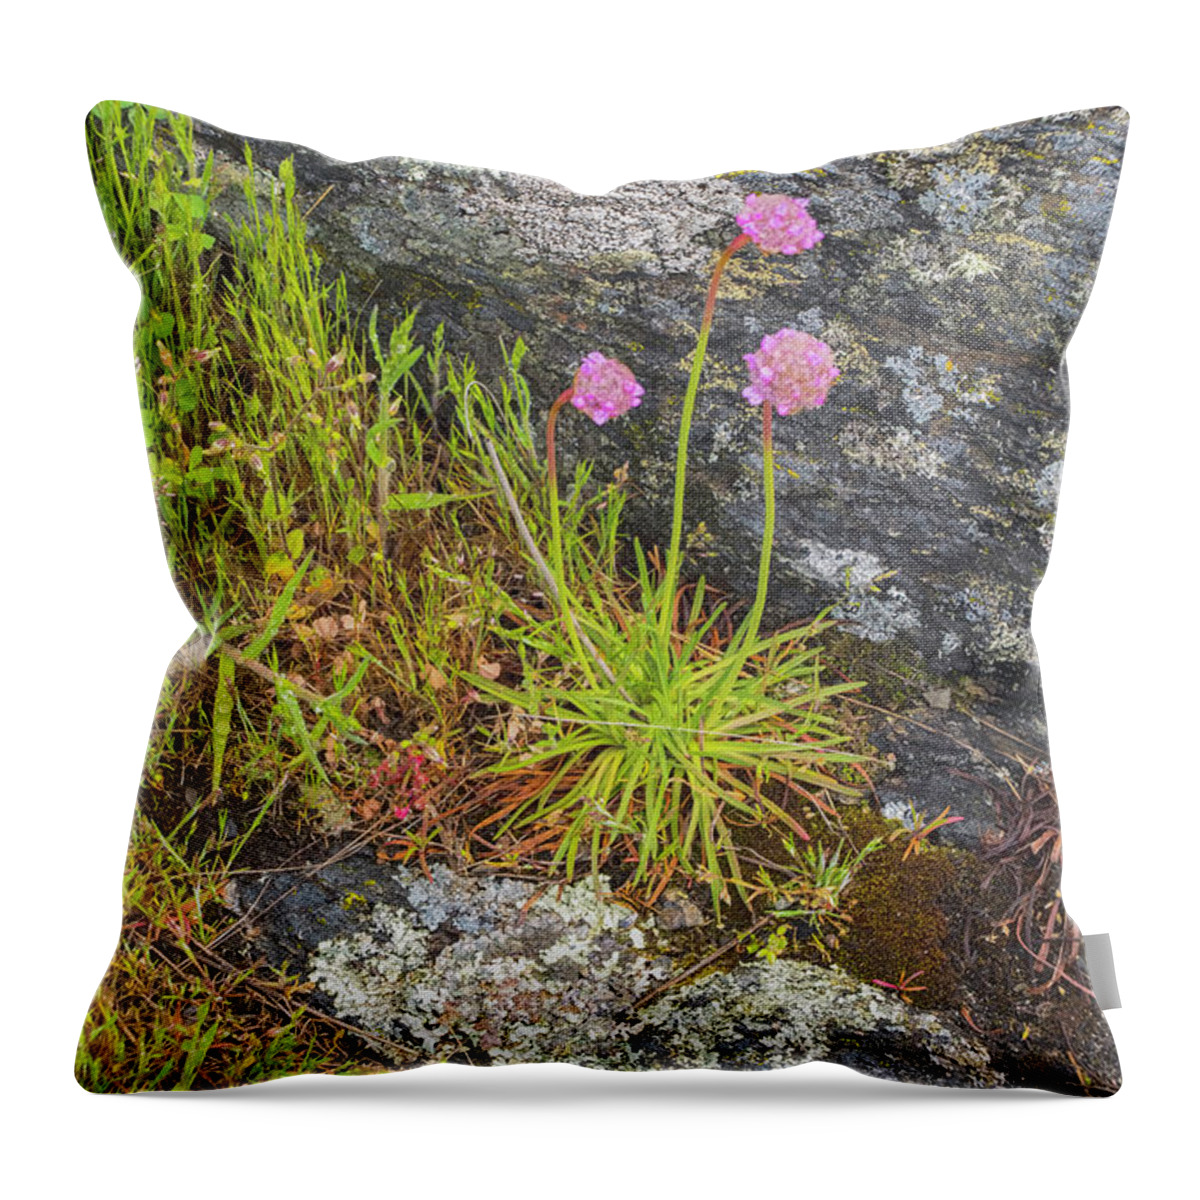 Oregon Coast Throw Pillow featuring the photograph Flower And Rock by Tom Singleton